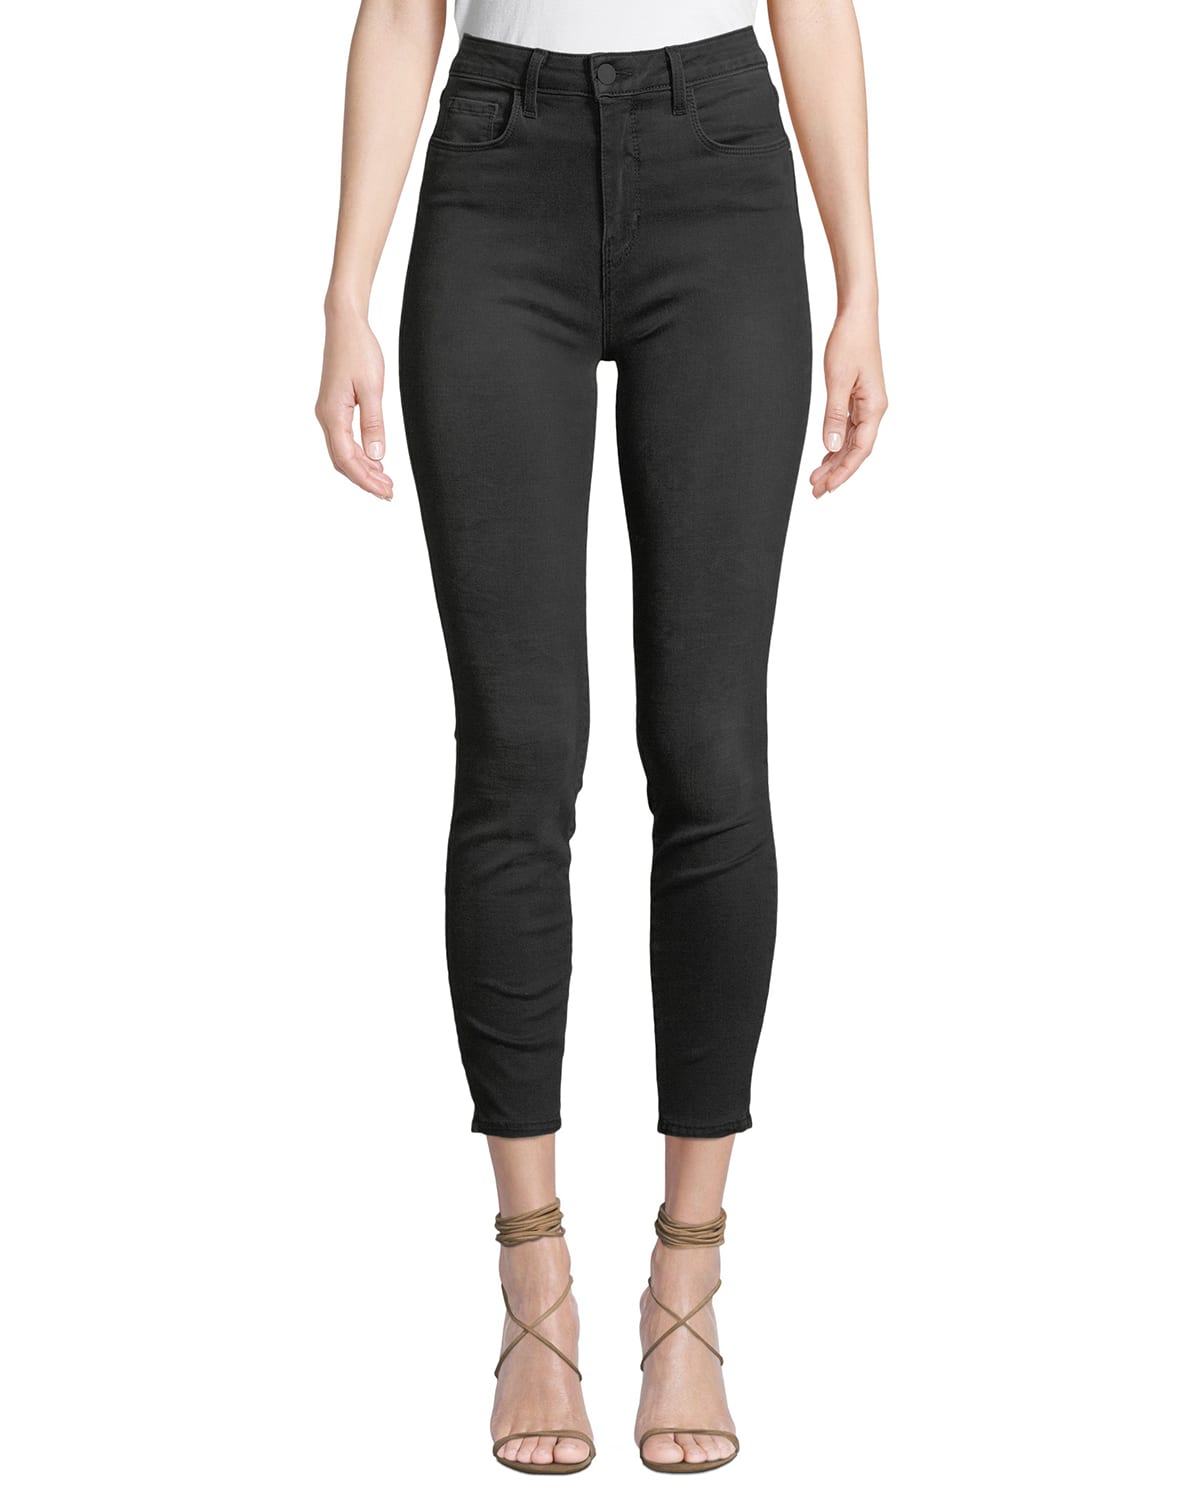 L'Agence Margot Coated High-Rise Skinny Ankle Jeans | Neiman Marcus